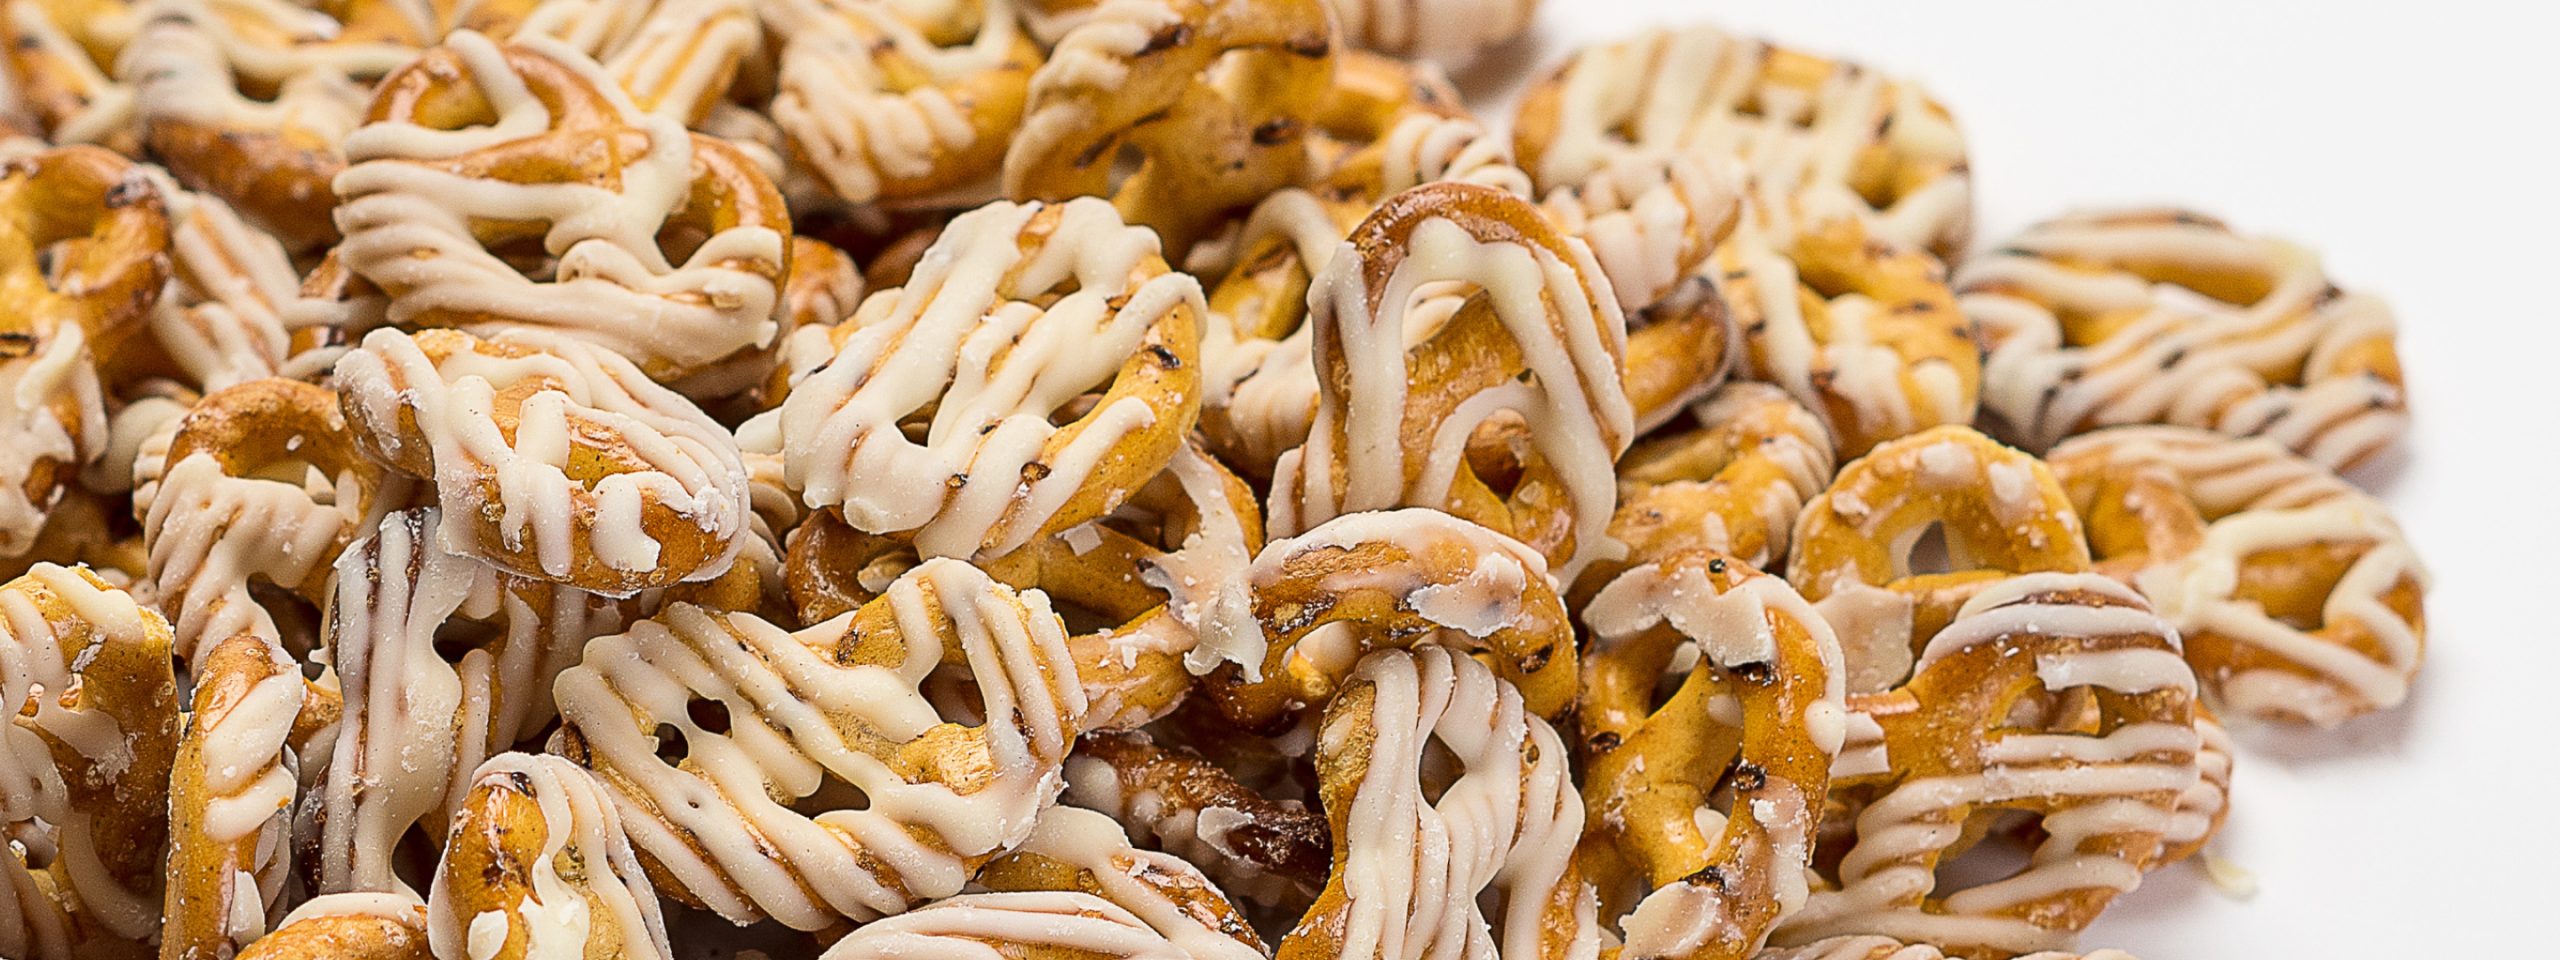 Close up photo of pretzels drizzled with icing